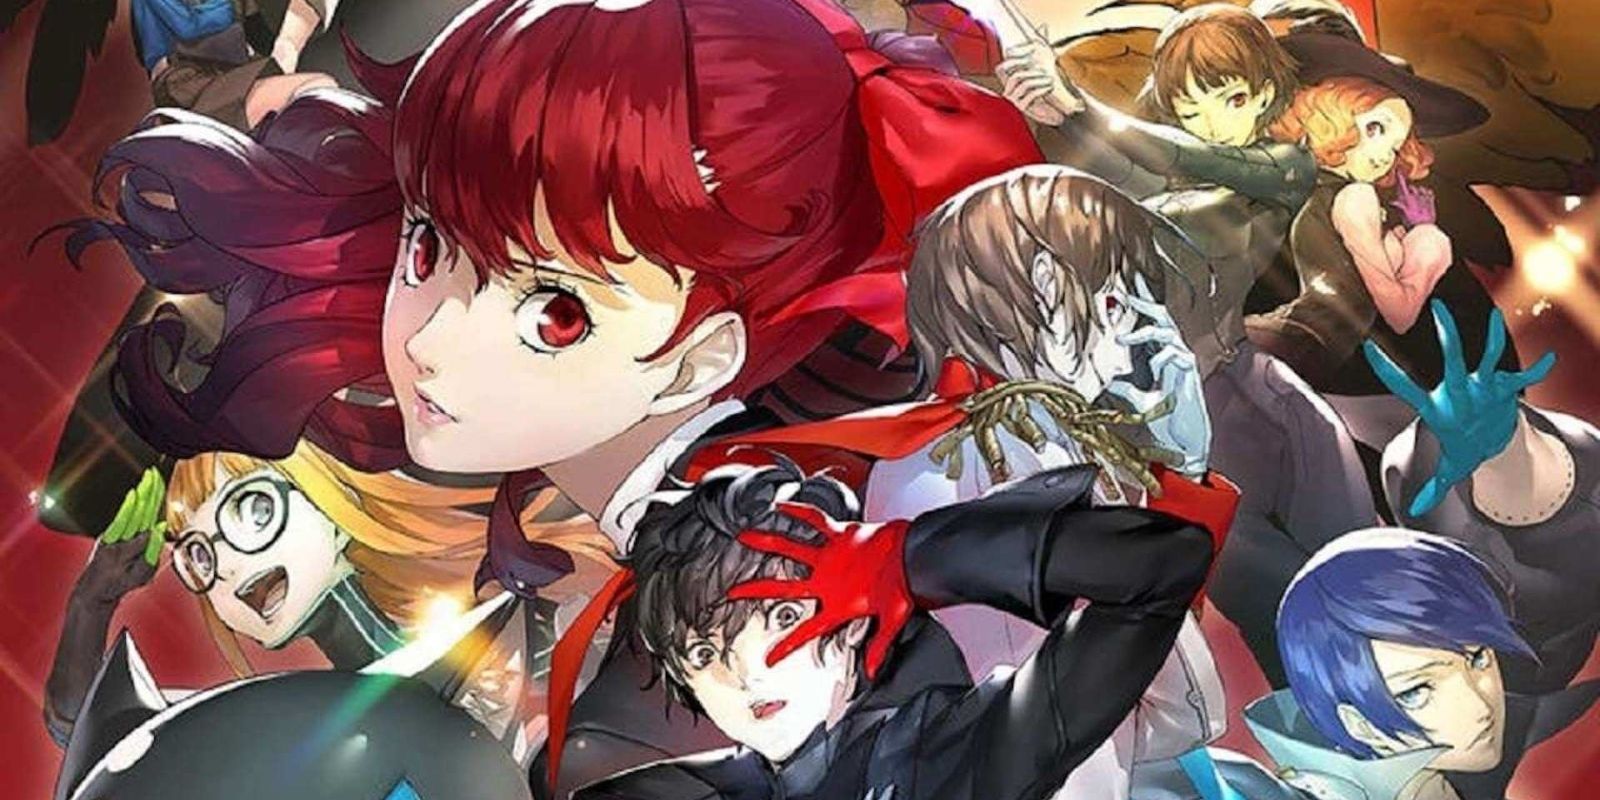 persona-5-royal-s-hardest-difficulty-is-easier-than-hard